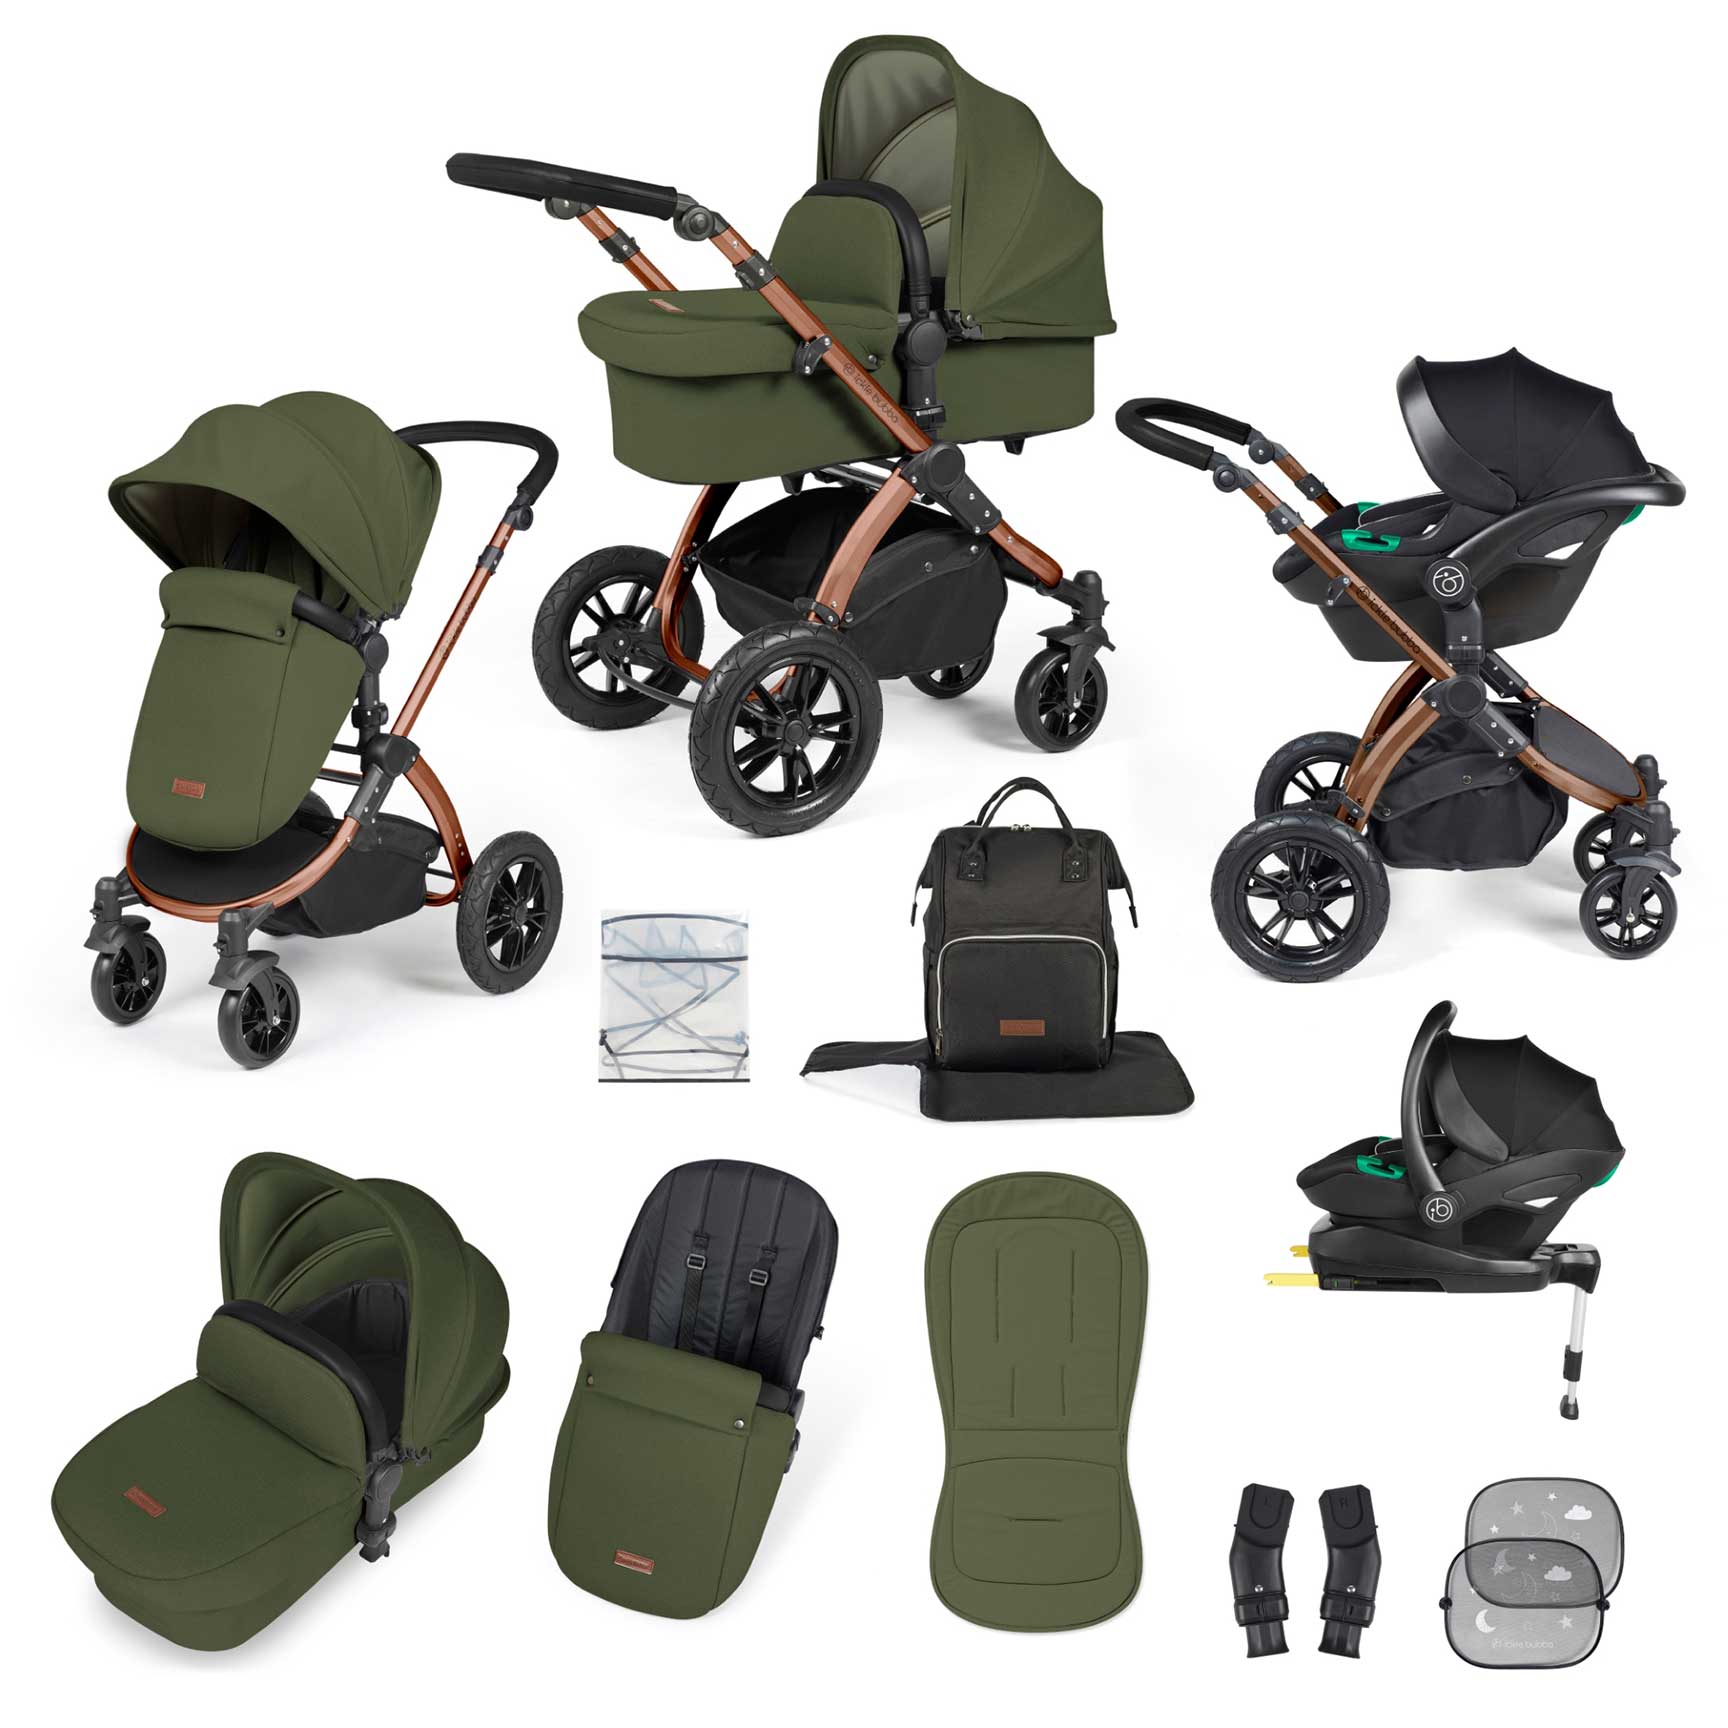 Ickle Bubba Stomp Luxe All-in-One Travel System with Isofix Base in Black/Woodland/Black Travel Systems 10-011-300-138 5056515026511